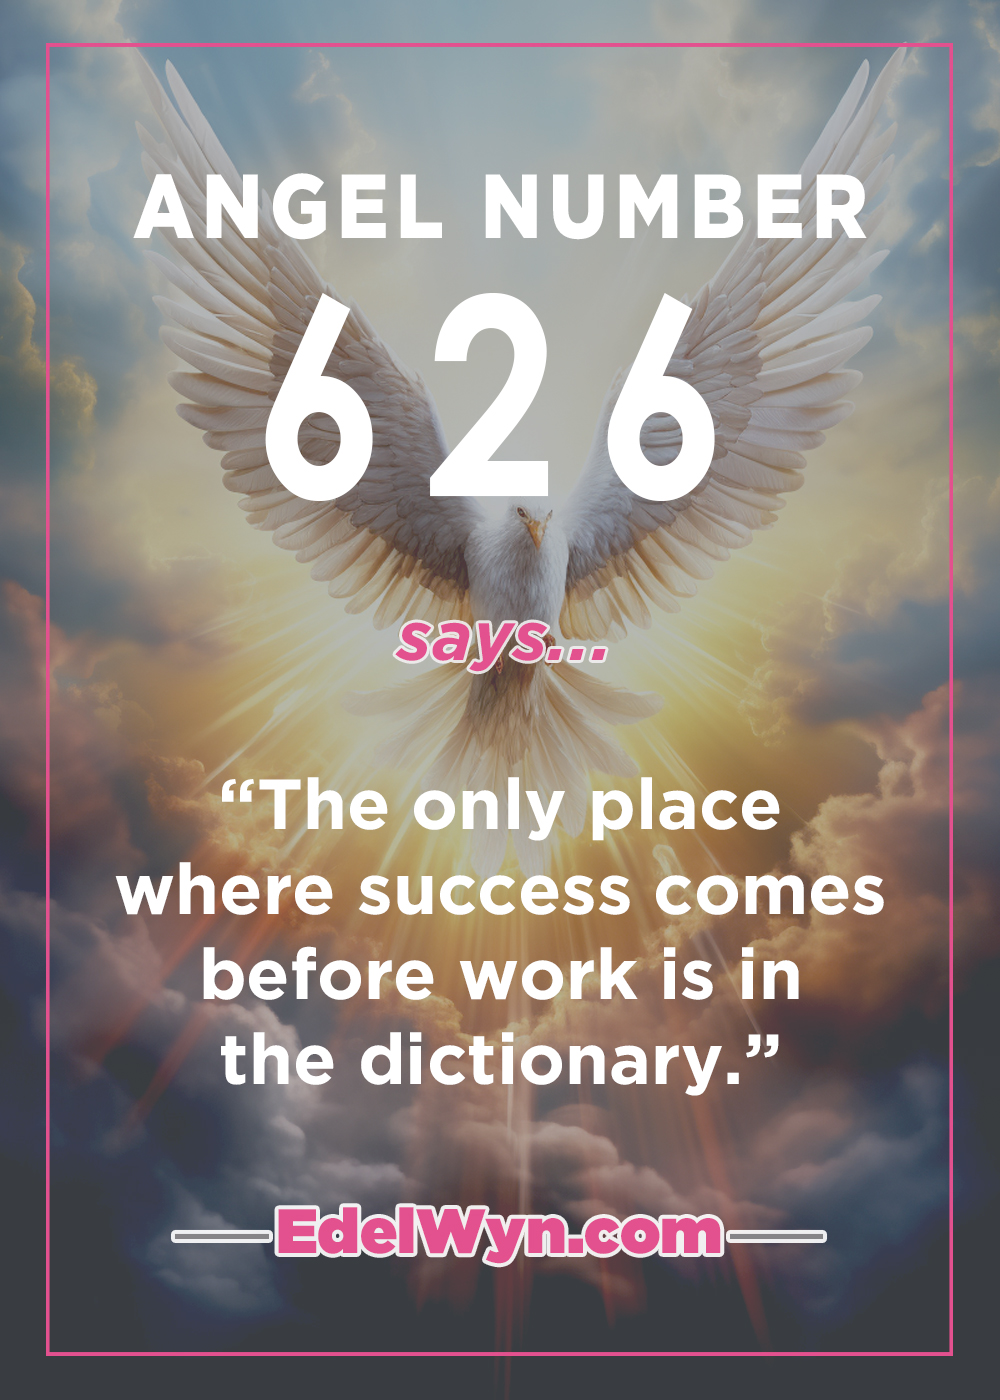 Angel Number 626 Tells Us That Good Times Are Coming...